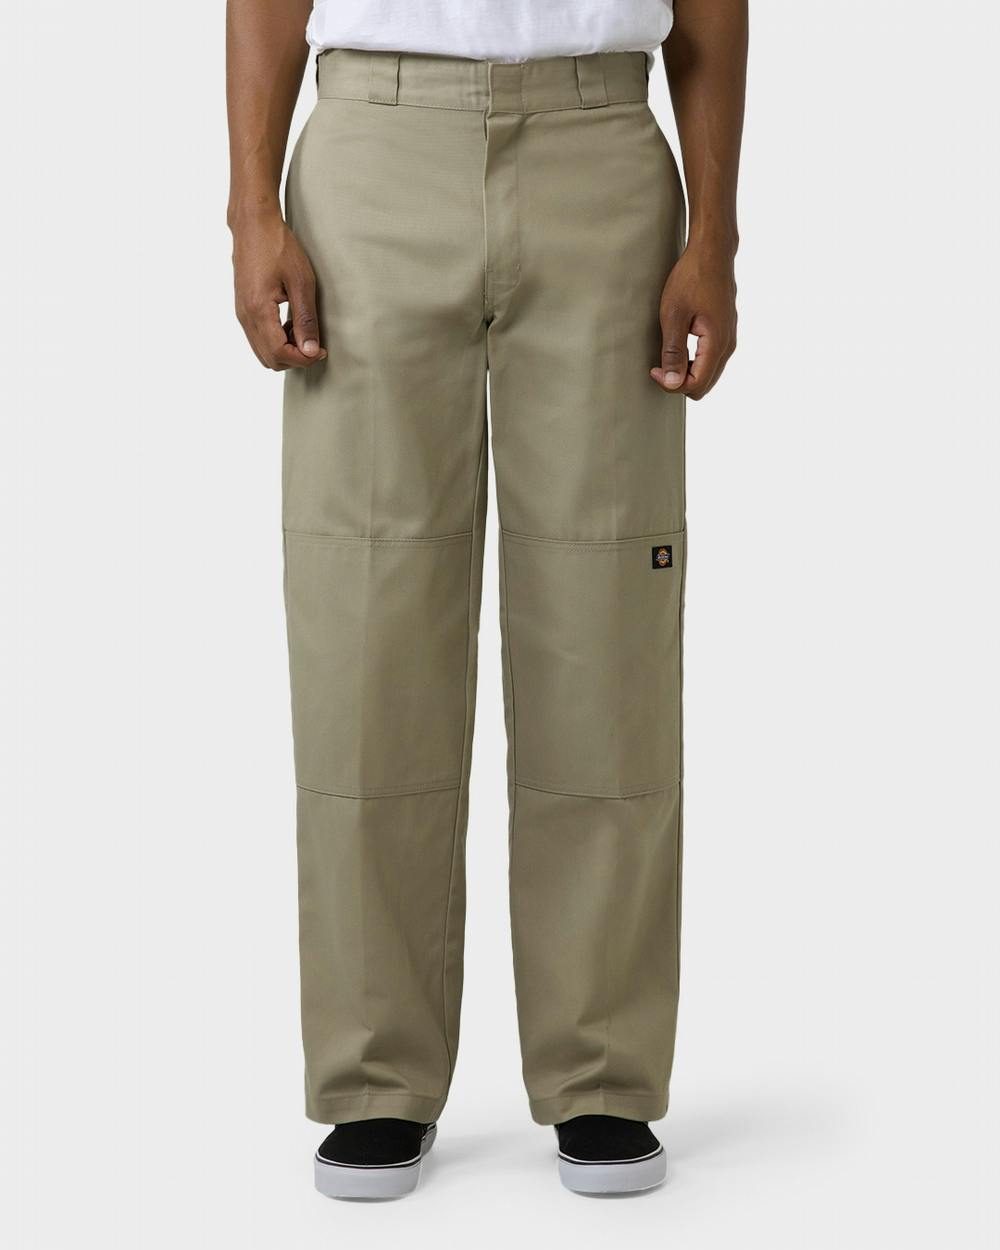 Durable and Comfortable Double Knee Work Pants from Dickies